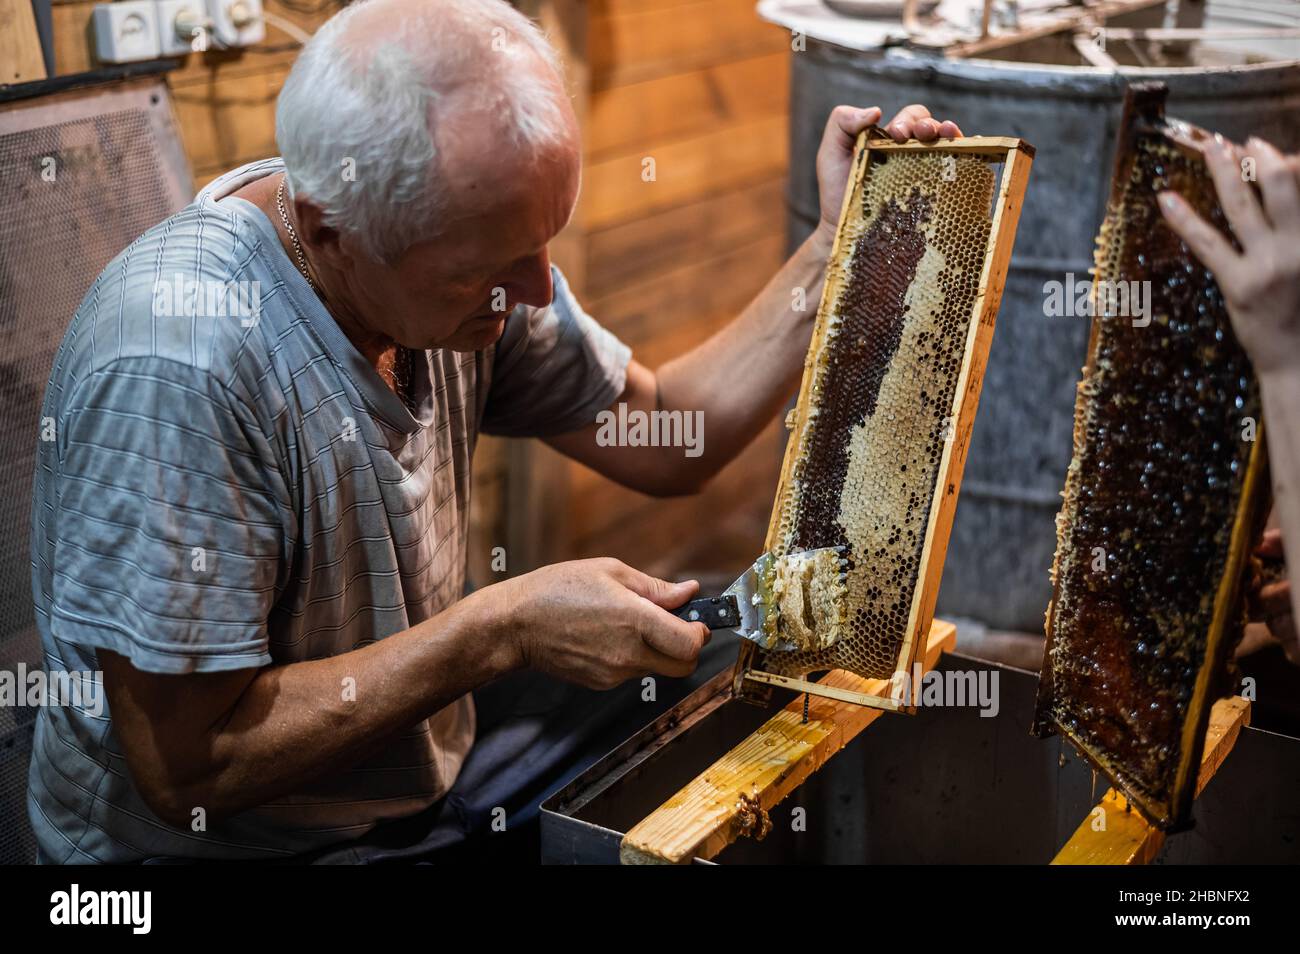 Beekeeper uncapping honey cells on the frames with a uncapping comb Stock Photo